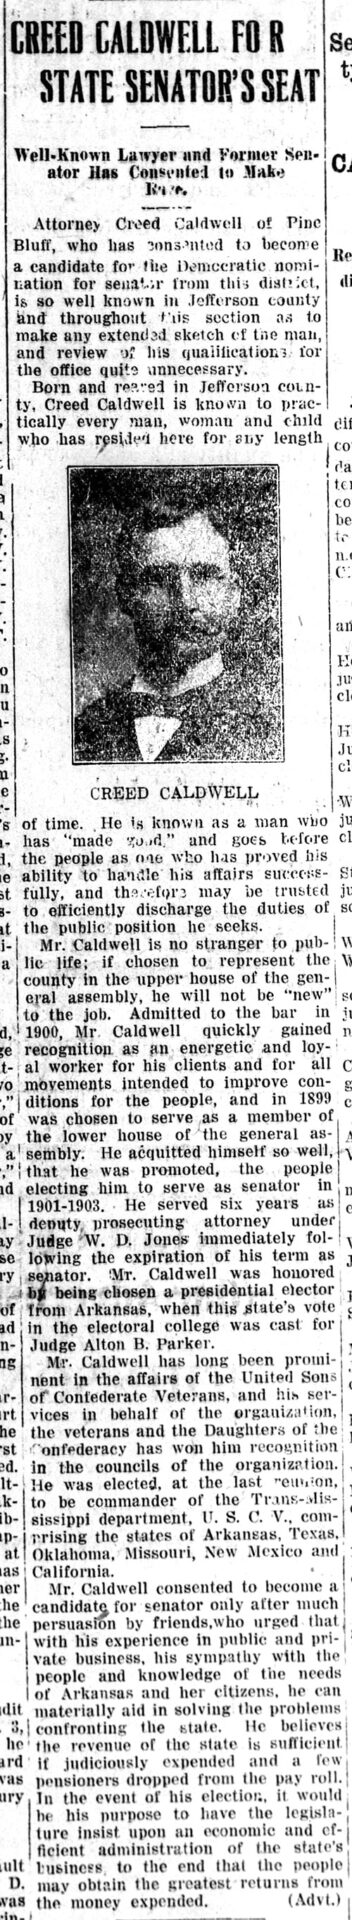 "Creed Caldwell for a State Senator's Seat" newspaper clipping